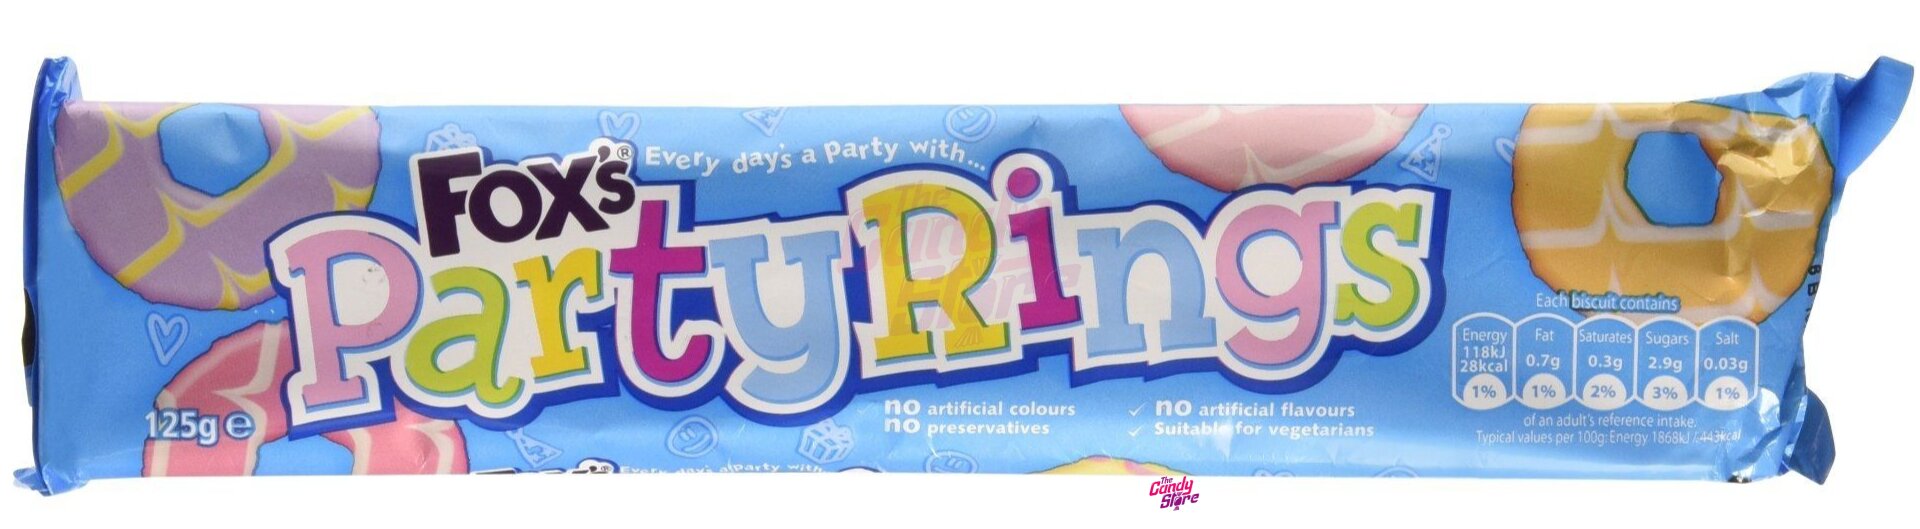 Fox's Biscuits revamps Party Rings in time for World Cup | News | The Grocer